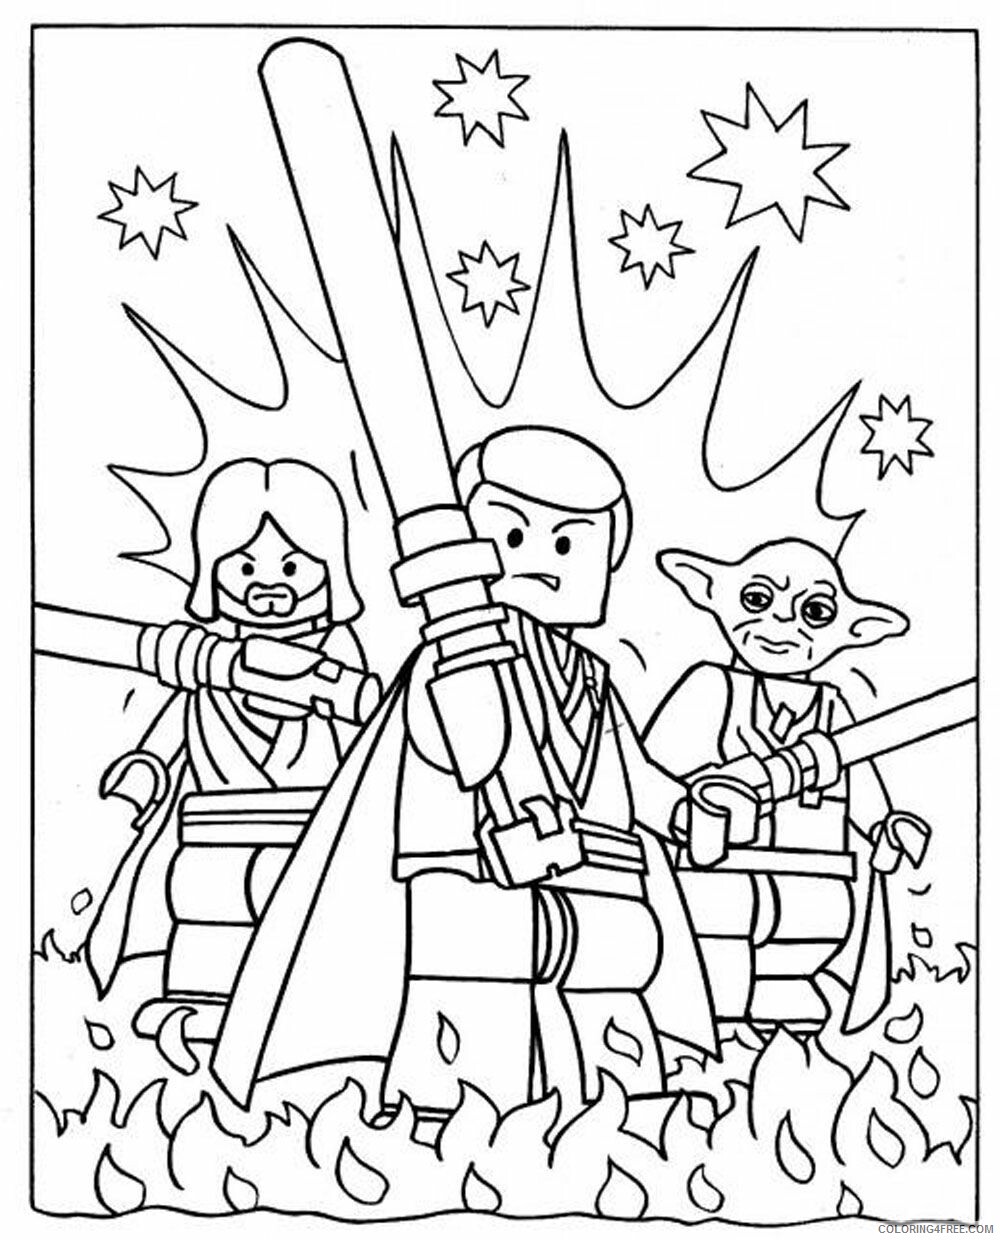 Star Wars Coloring Pages TV Film Lego Star Wars Fire Printable 2020 07810 Coloring4free